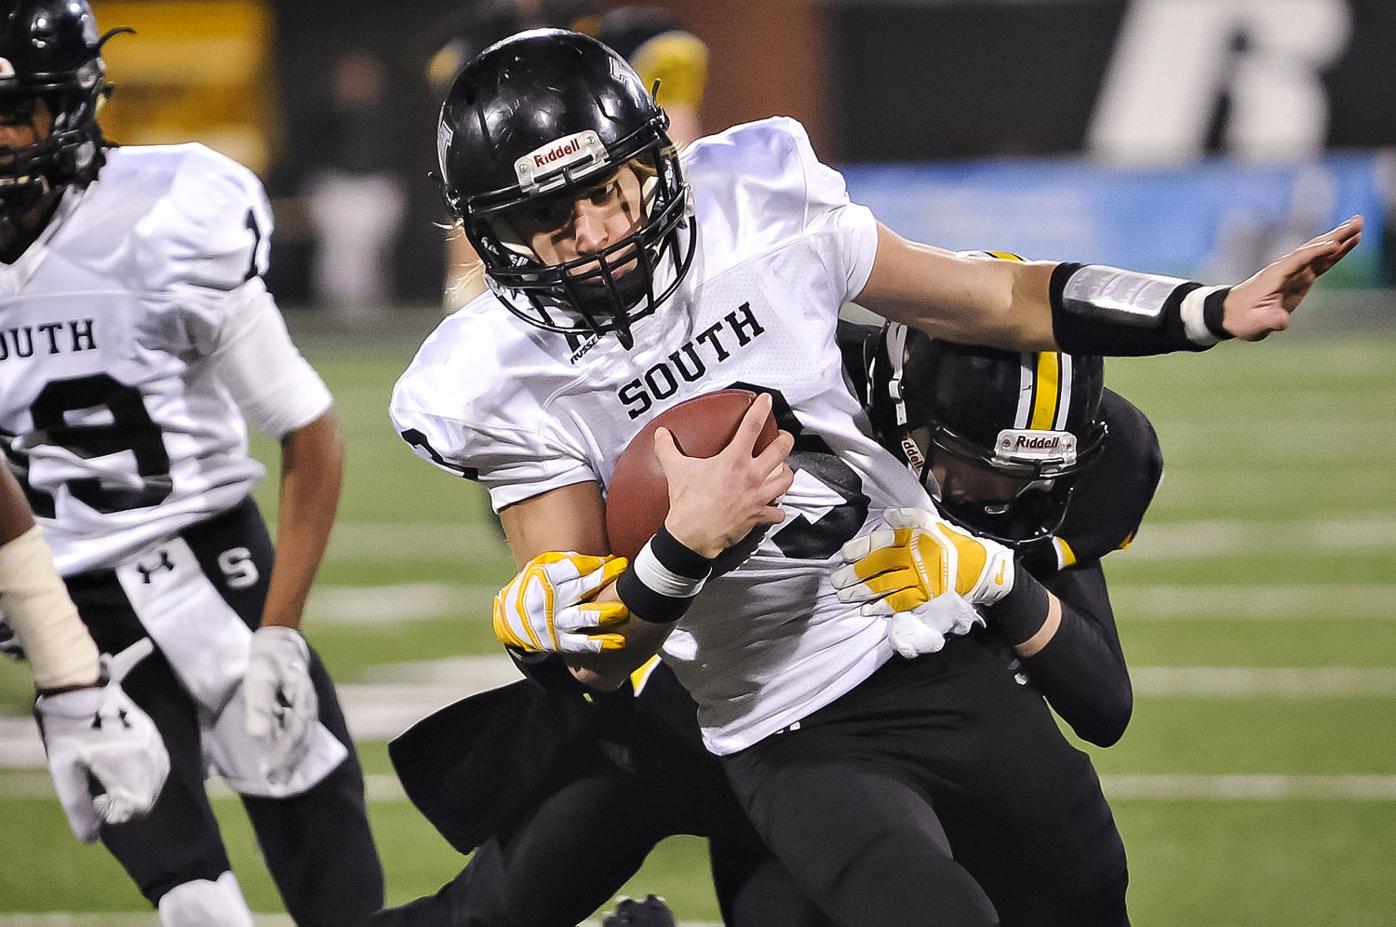 South Warren Wins 4A State Title 36-6 Over Johnson Central